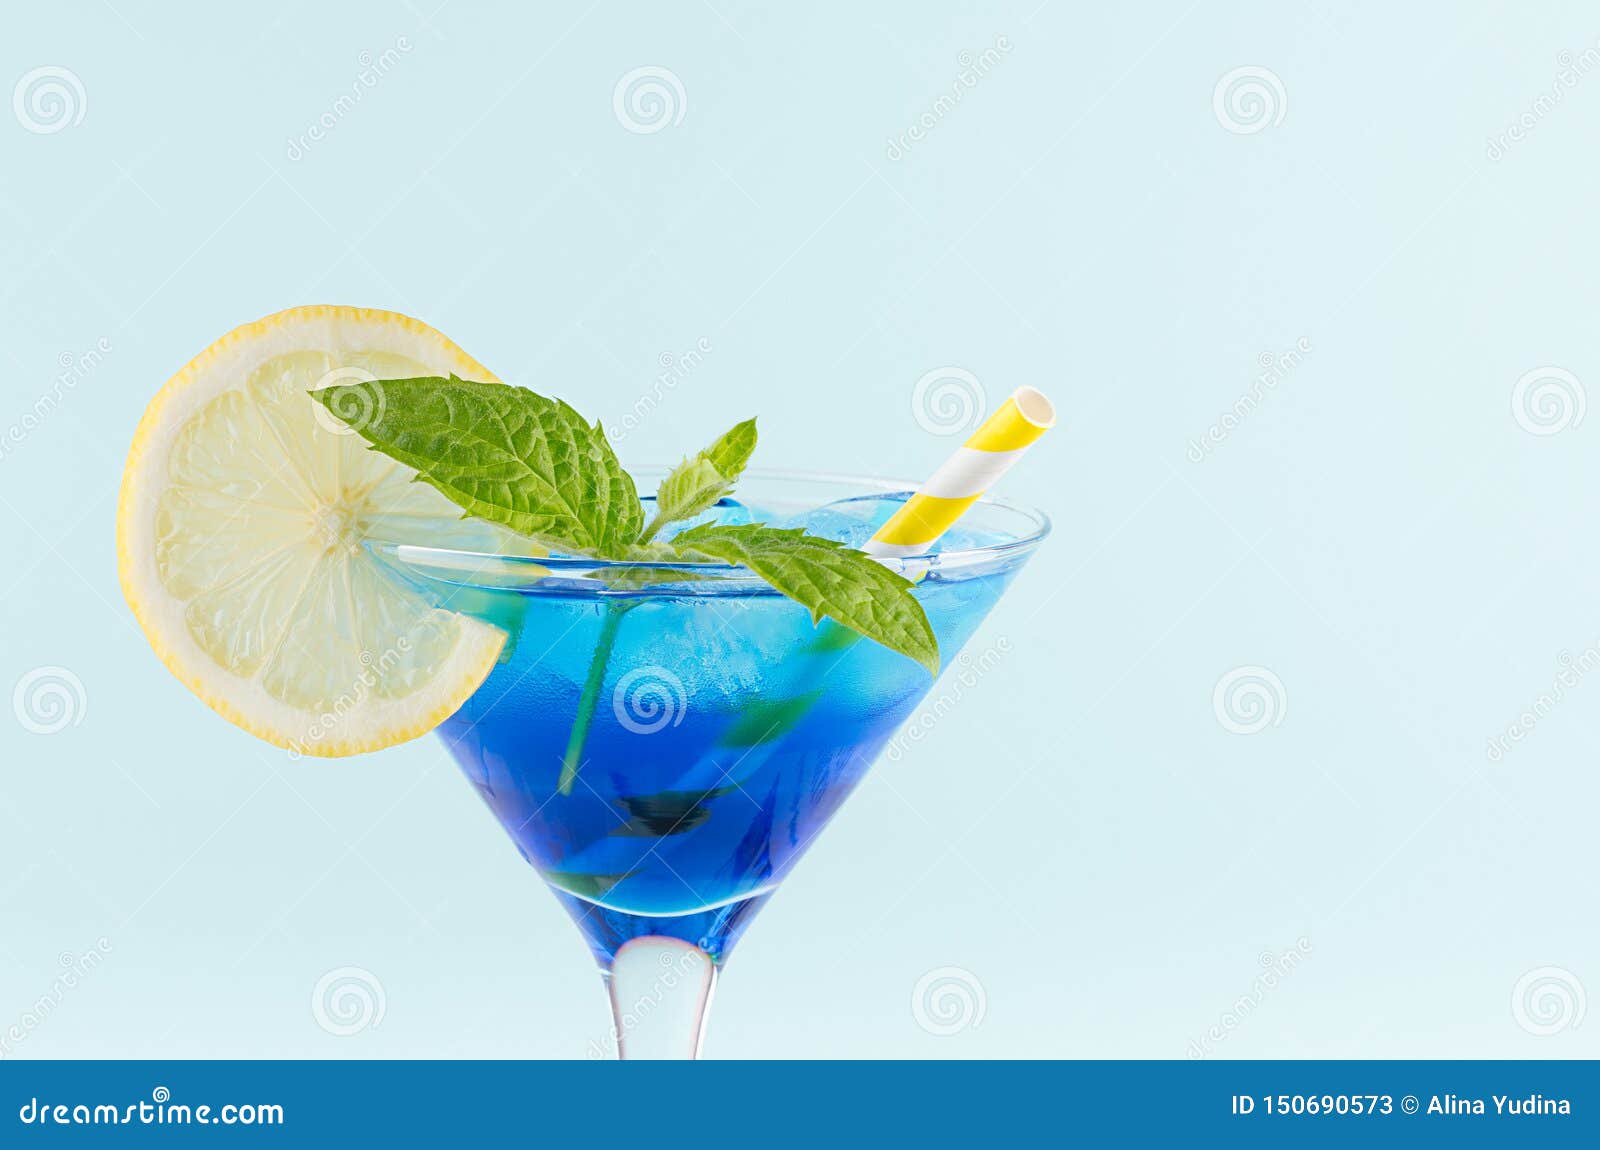 youth fresh alcohol blue hawaii cocktail with licor curacao, ice cube, lemon slice, yellow straw in wine glass on mint background.